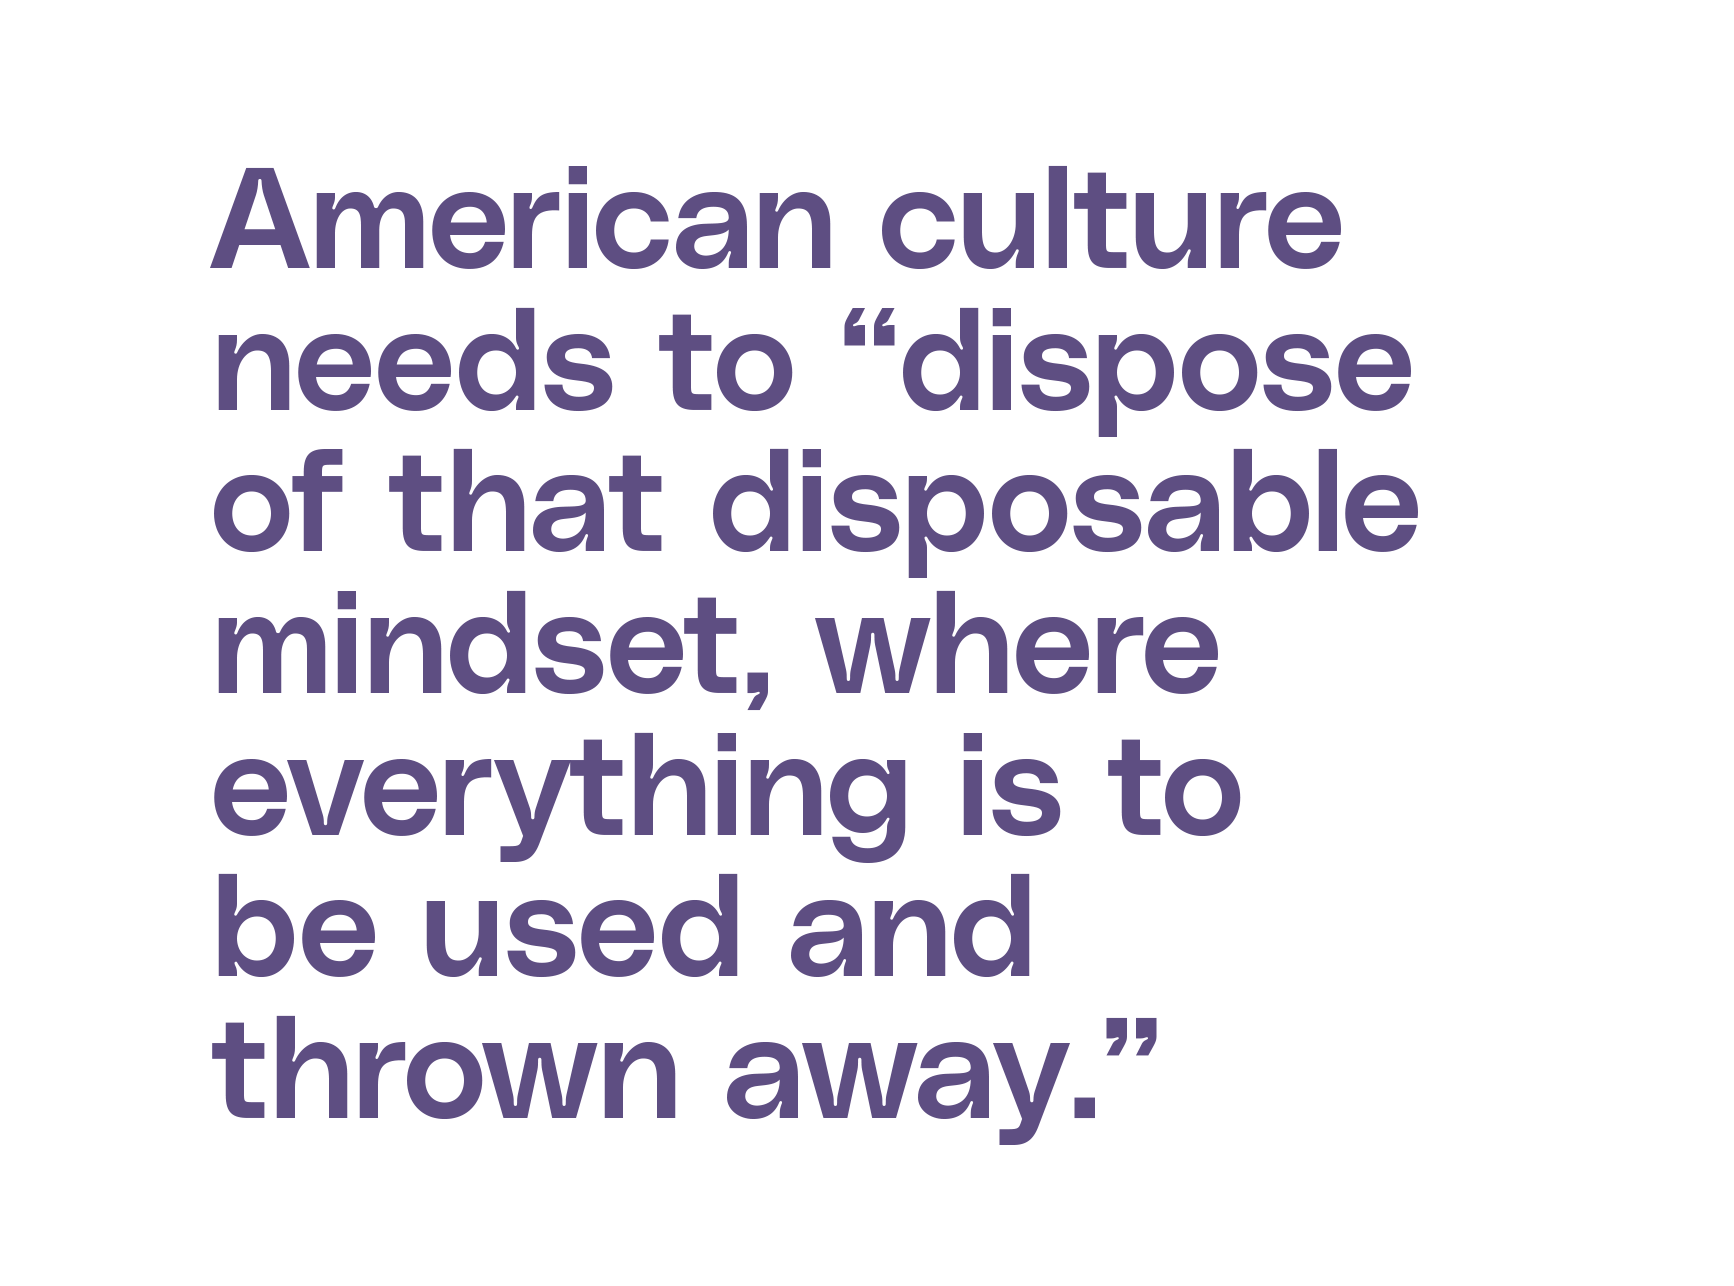 American culture needs to “dispose of that disposable mindset, where everything is to be used and thrown away.”